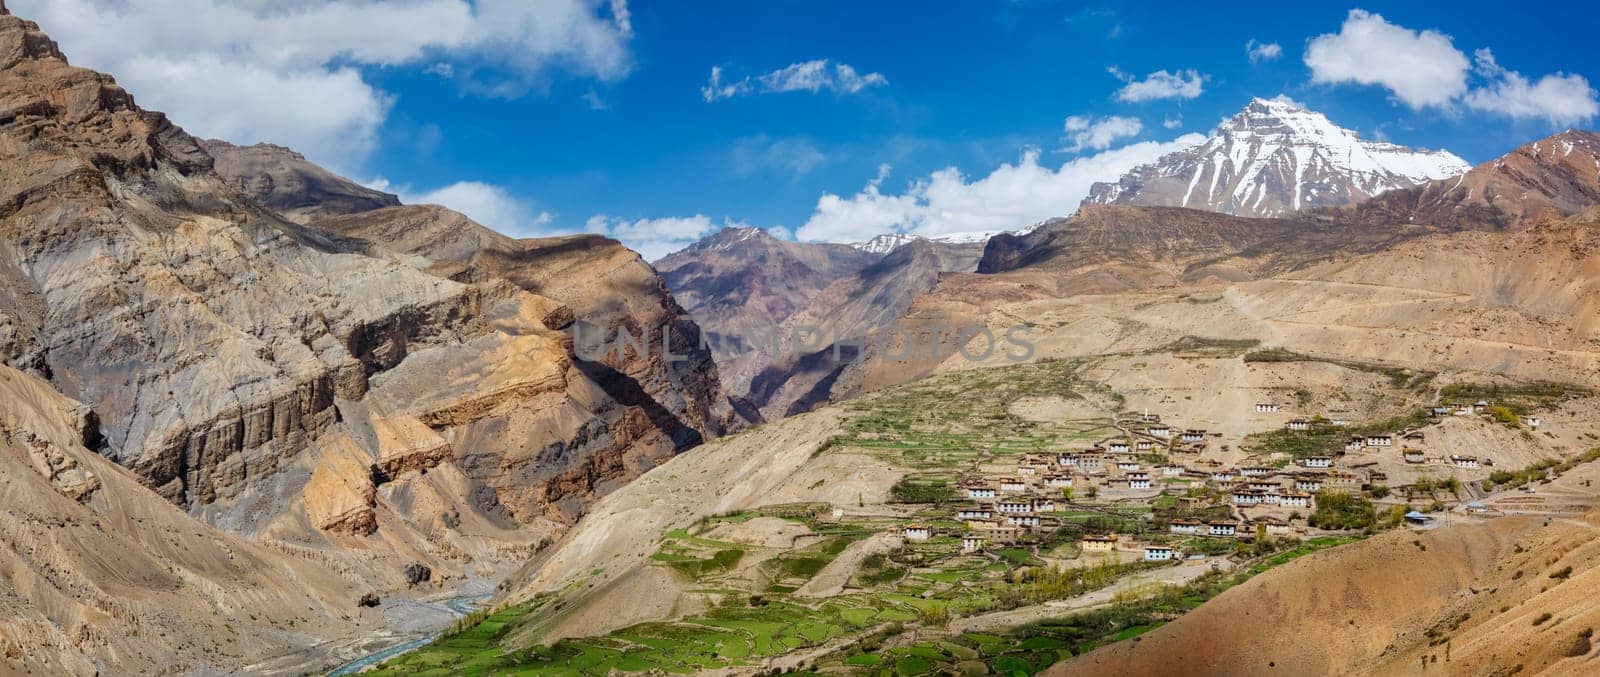 Panorama of Spiti valley and Kibber village by dimol